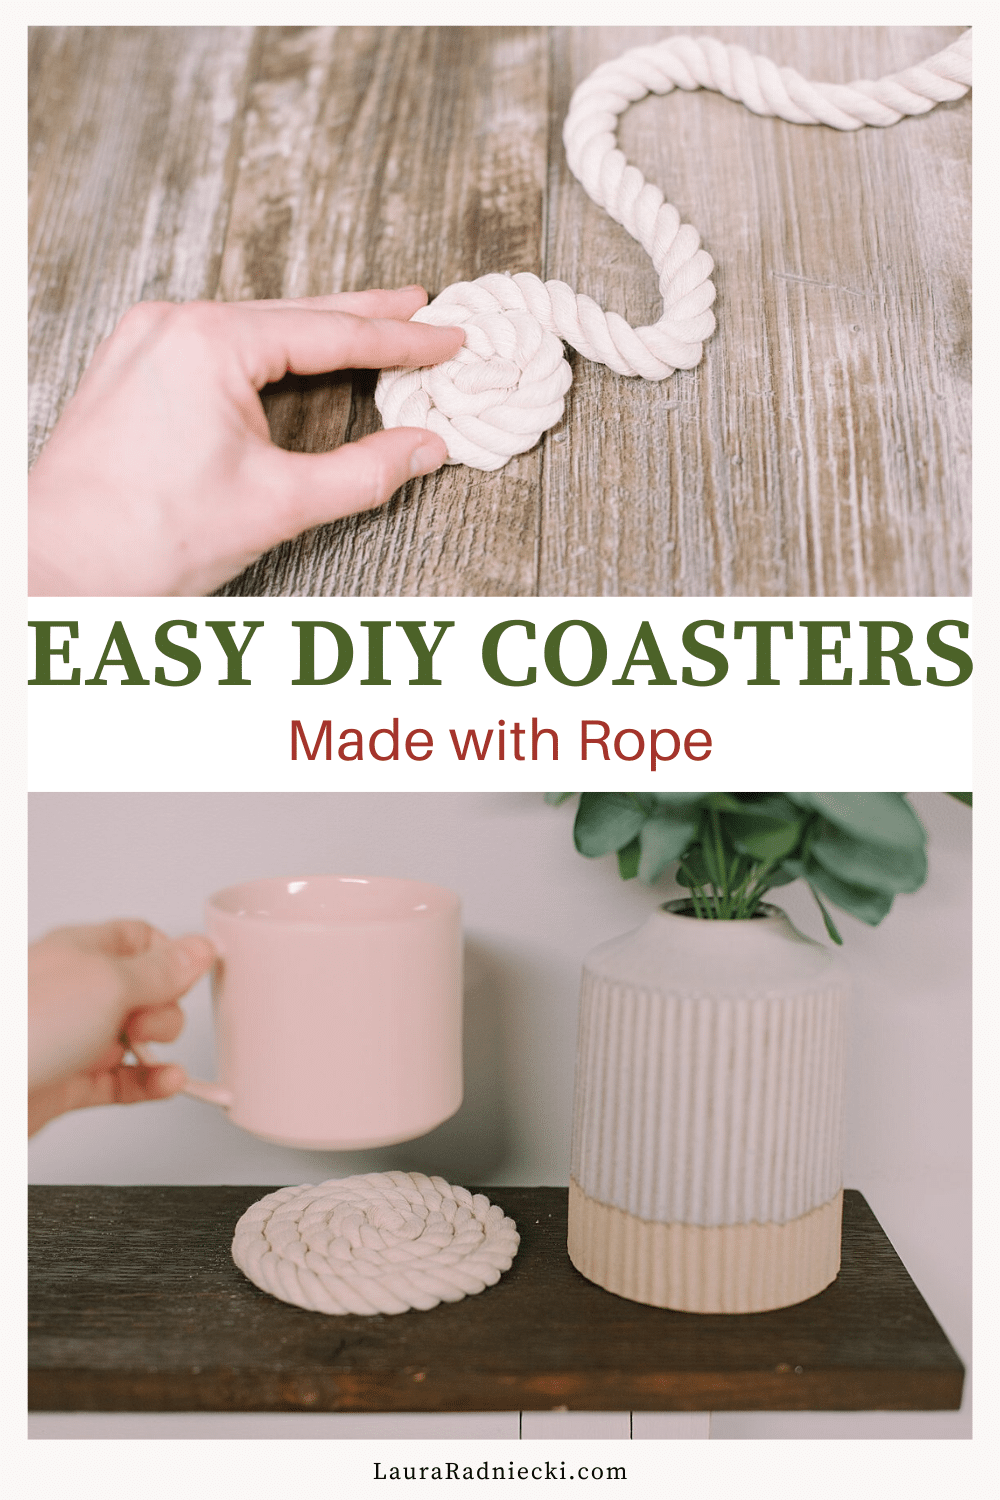 How to Make a Rope Coaster